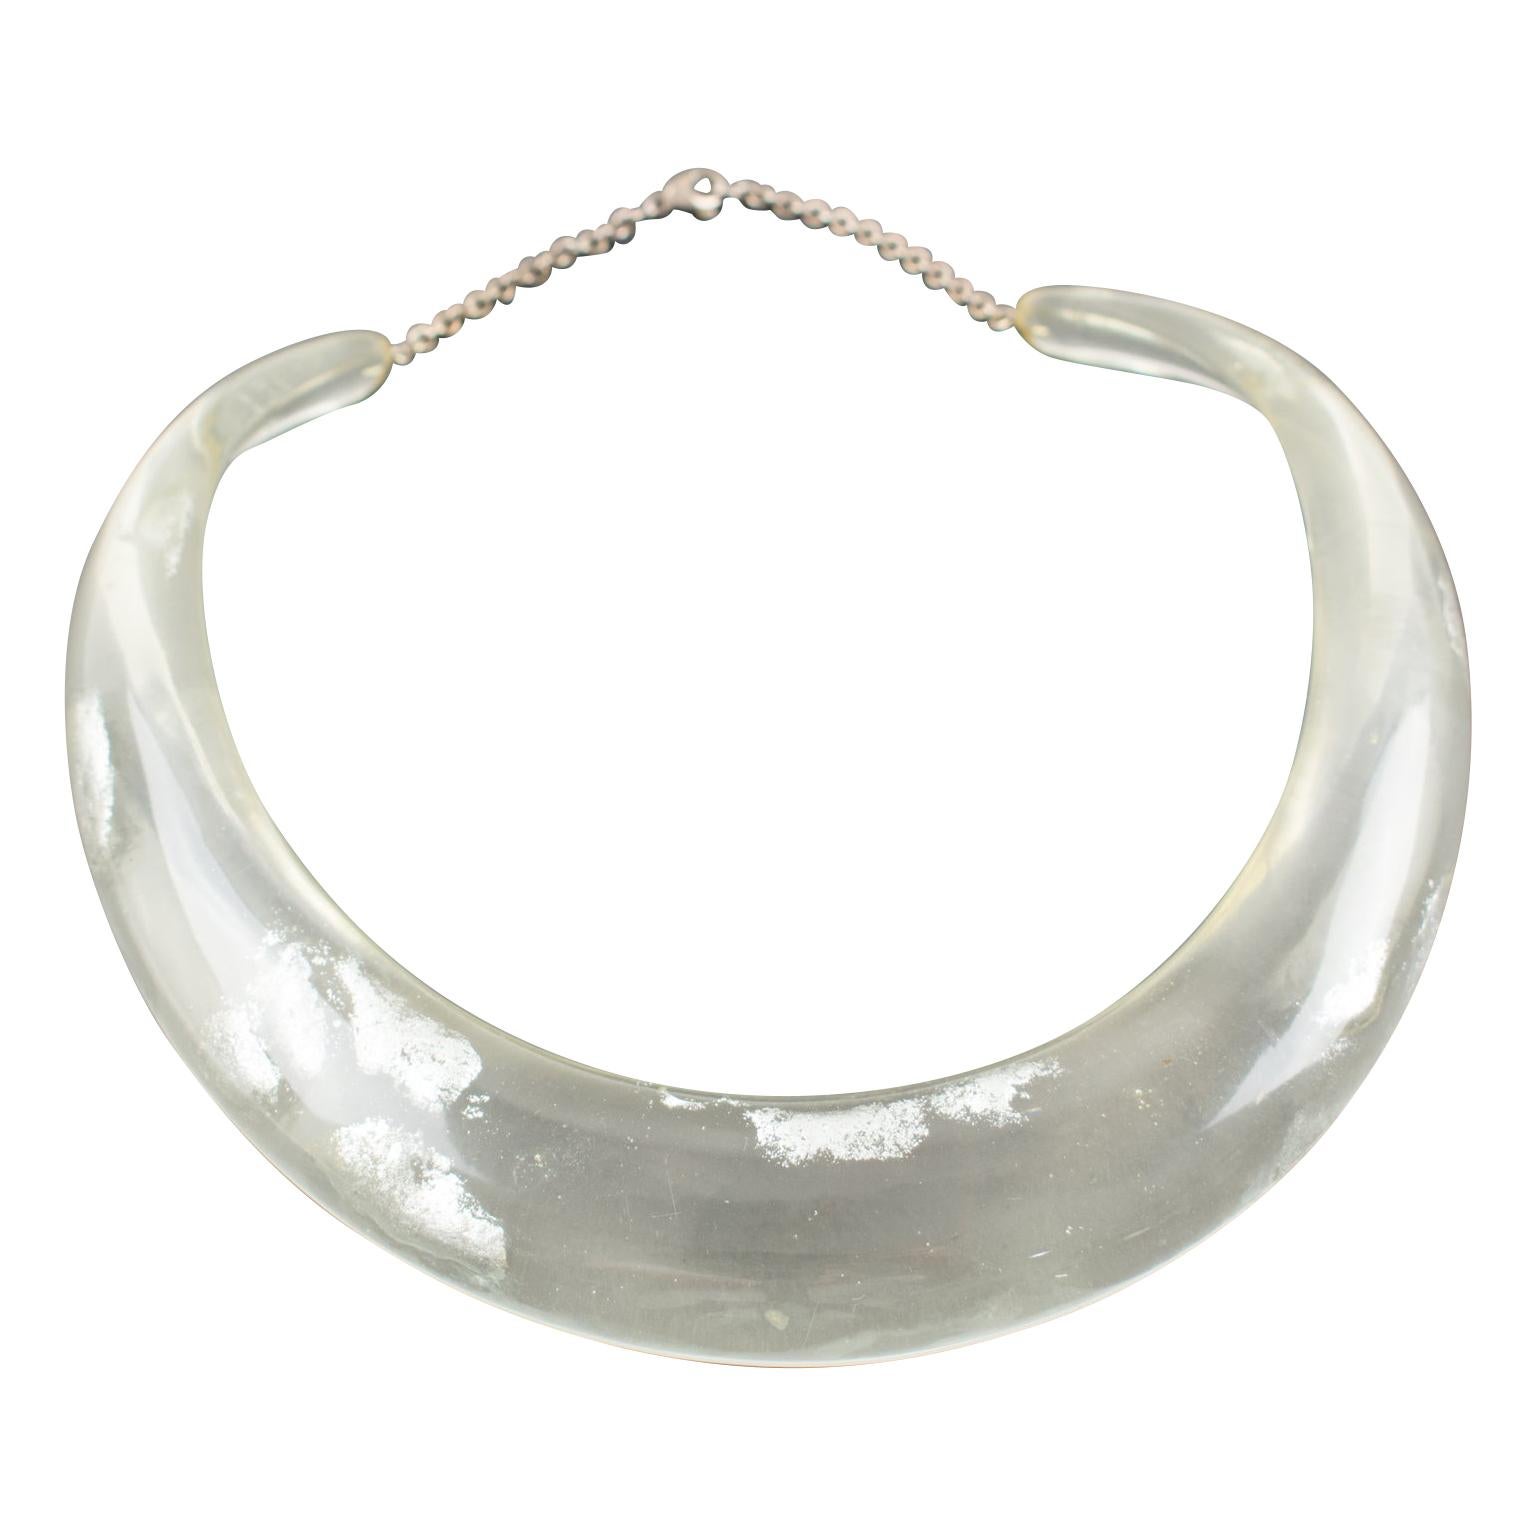 Transparent Resin Rigid Collar Necklace with Silver Flakes Inclusions